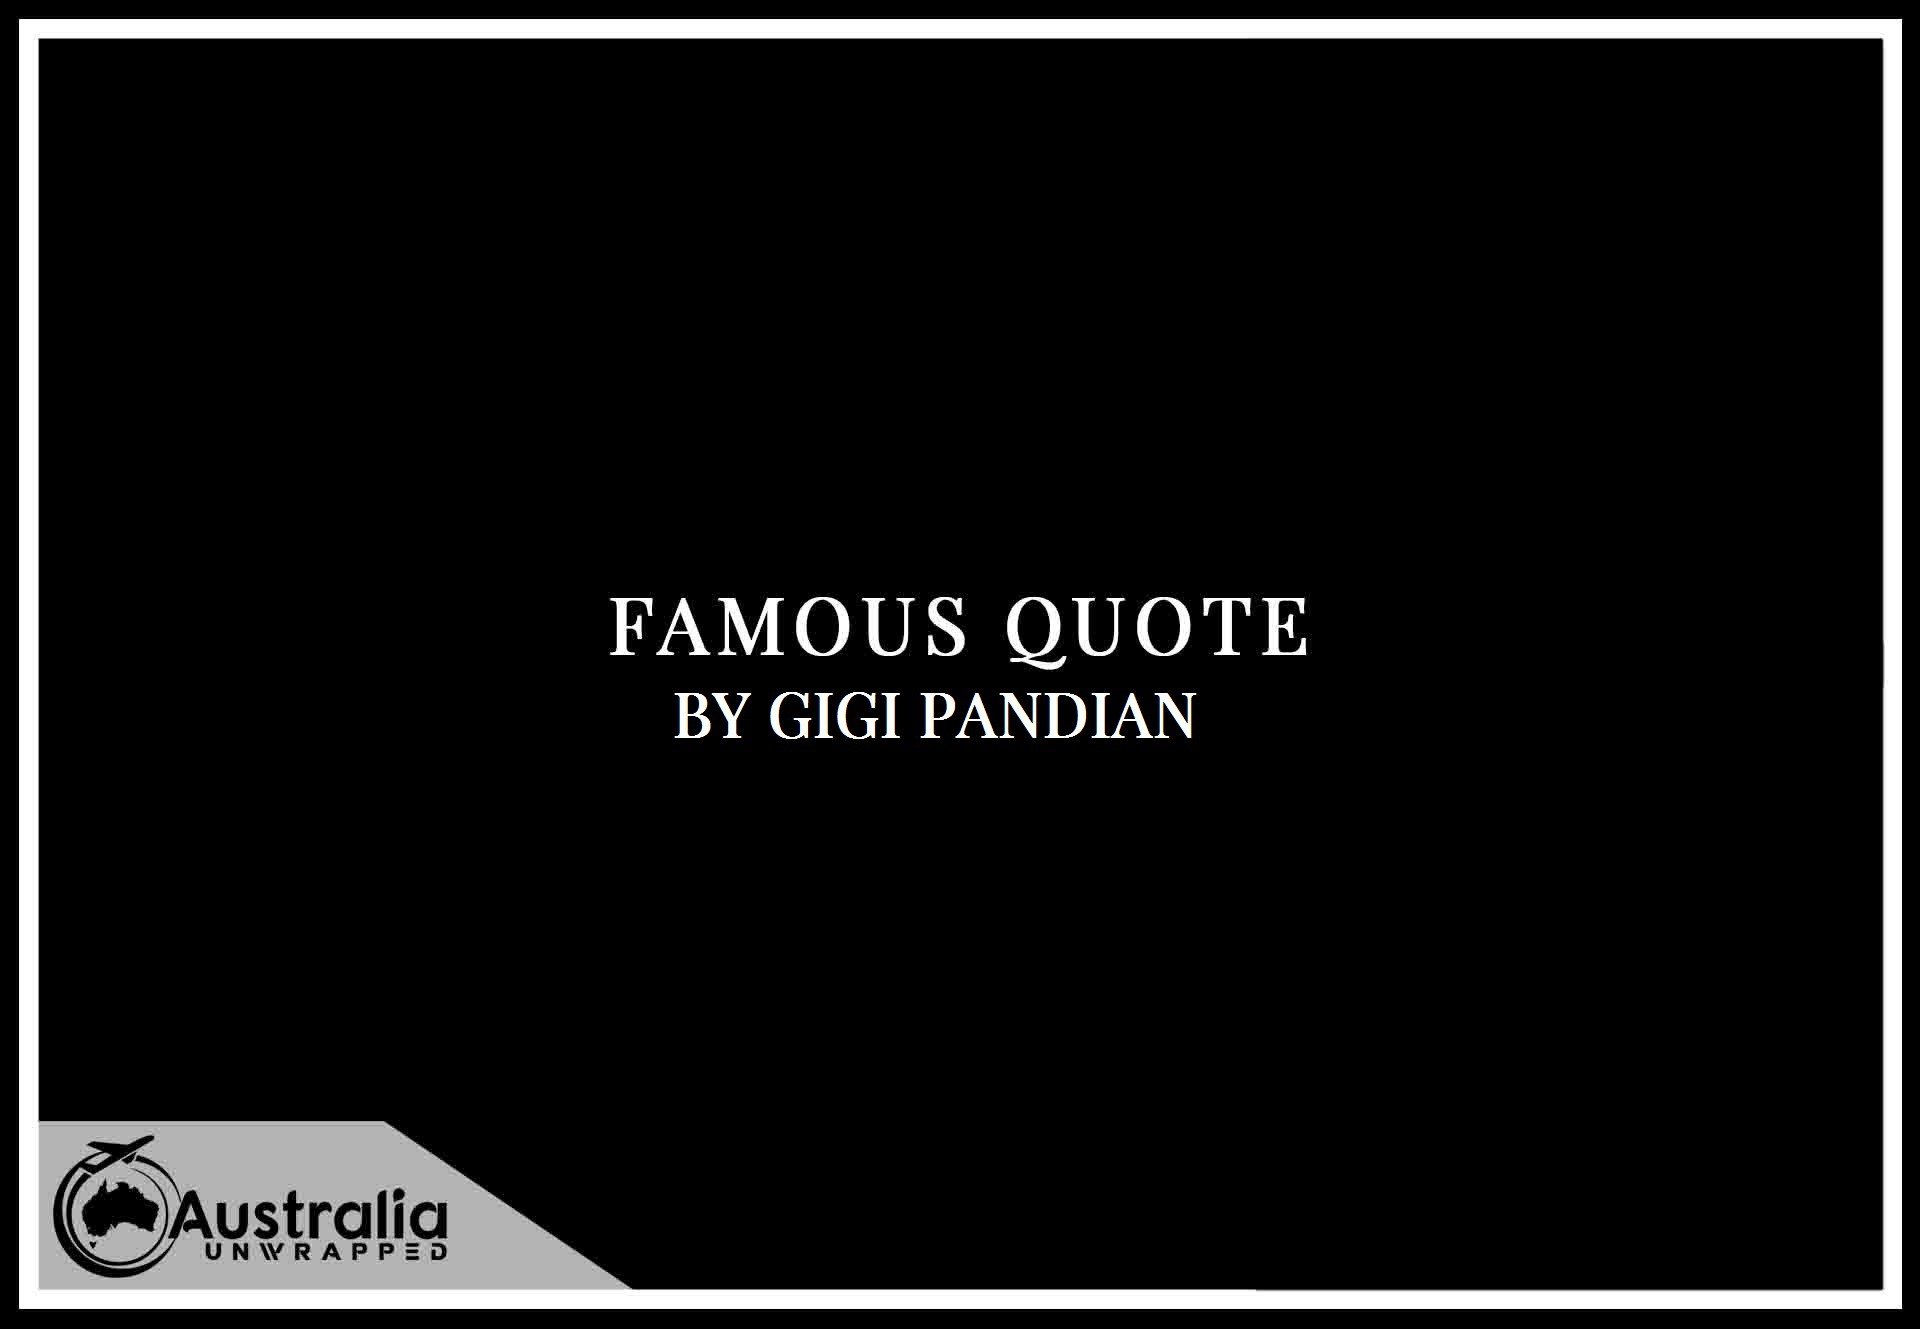 Gigi Pandian’s Top 1 Popular and Famous Quotes